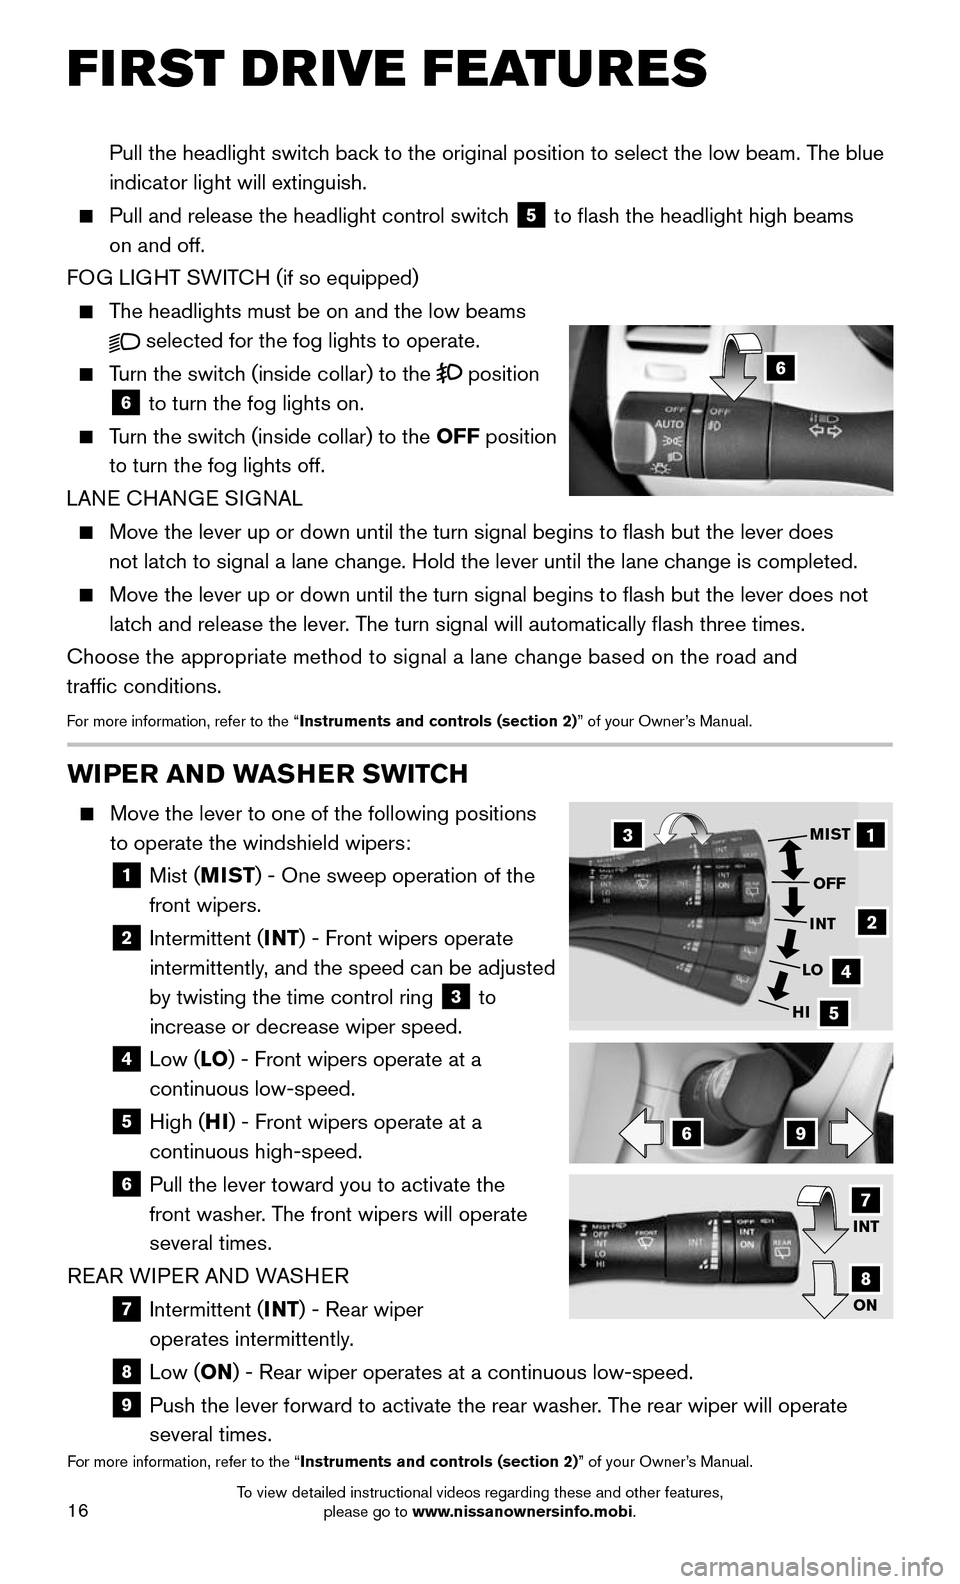 NISSAN MURANO HYBRID 2016 3.G Quick Reference Guide 16
FIRST DRIVE FEATURES
WIPER AND WASHER SWITCH
    Move the lever to one of the following positions 
to operate the windshield wipers: 
    1  Mist (MIST) - One sweep operation of the  
front wipers.